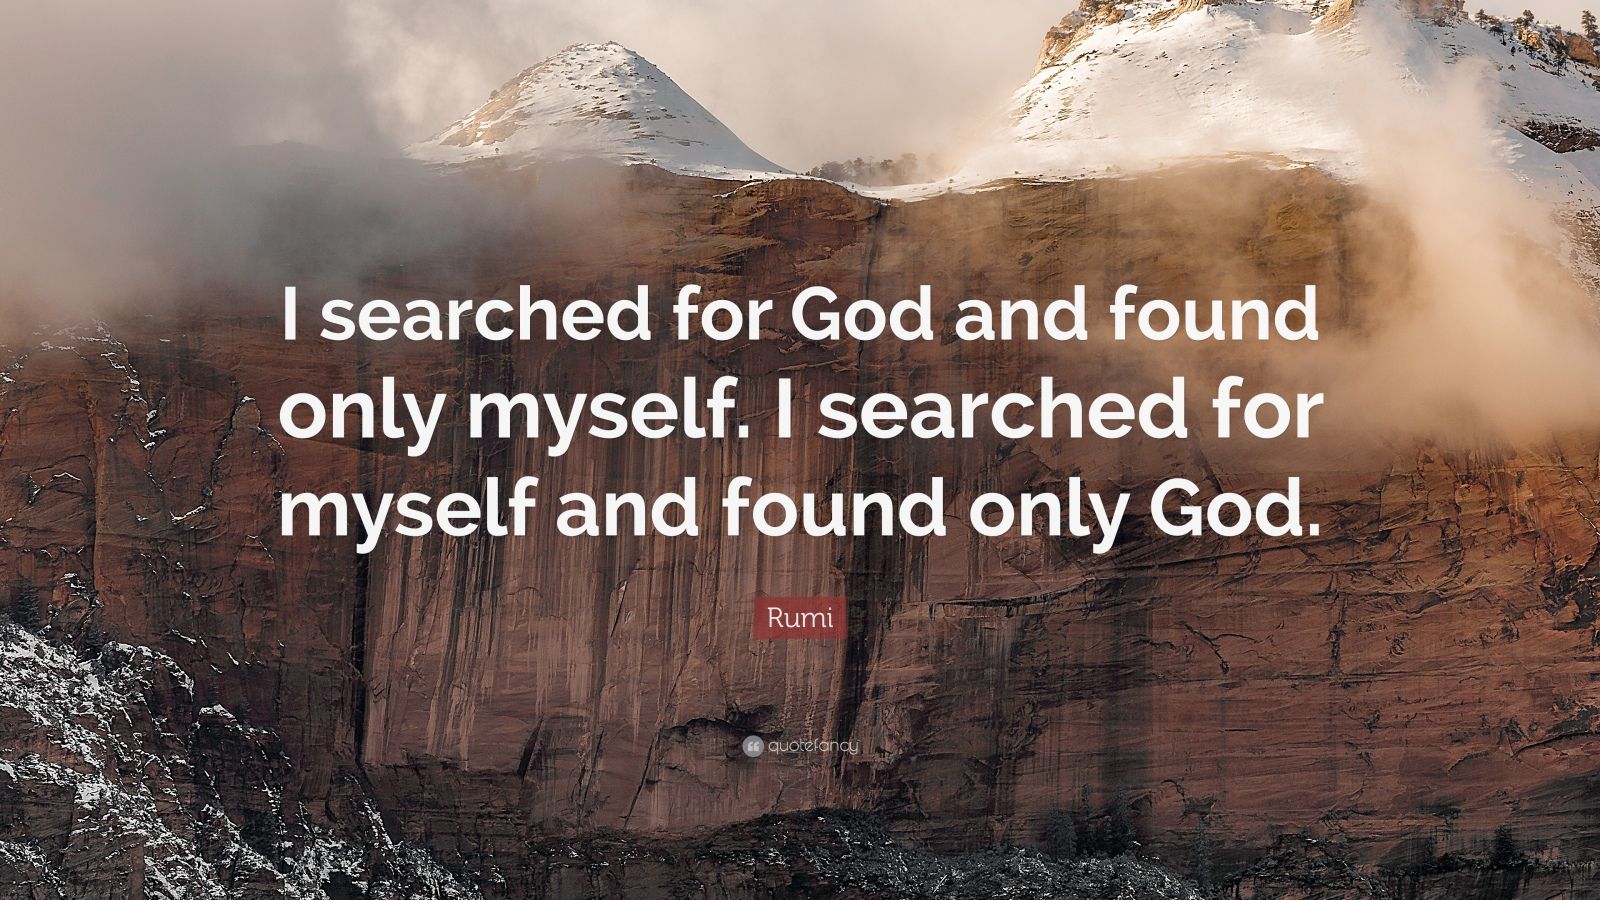 Rumi Quote: “I searched for God and found only myself. I searched for